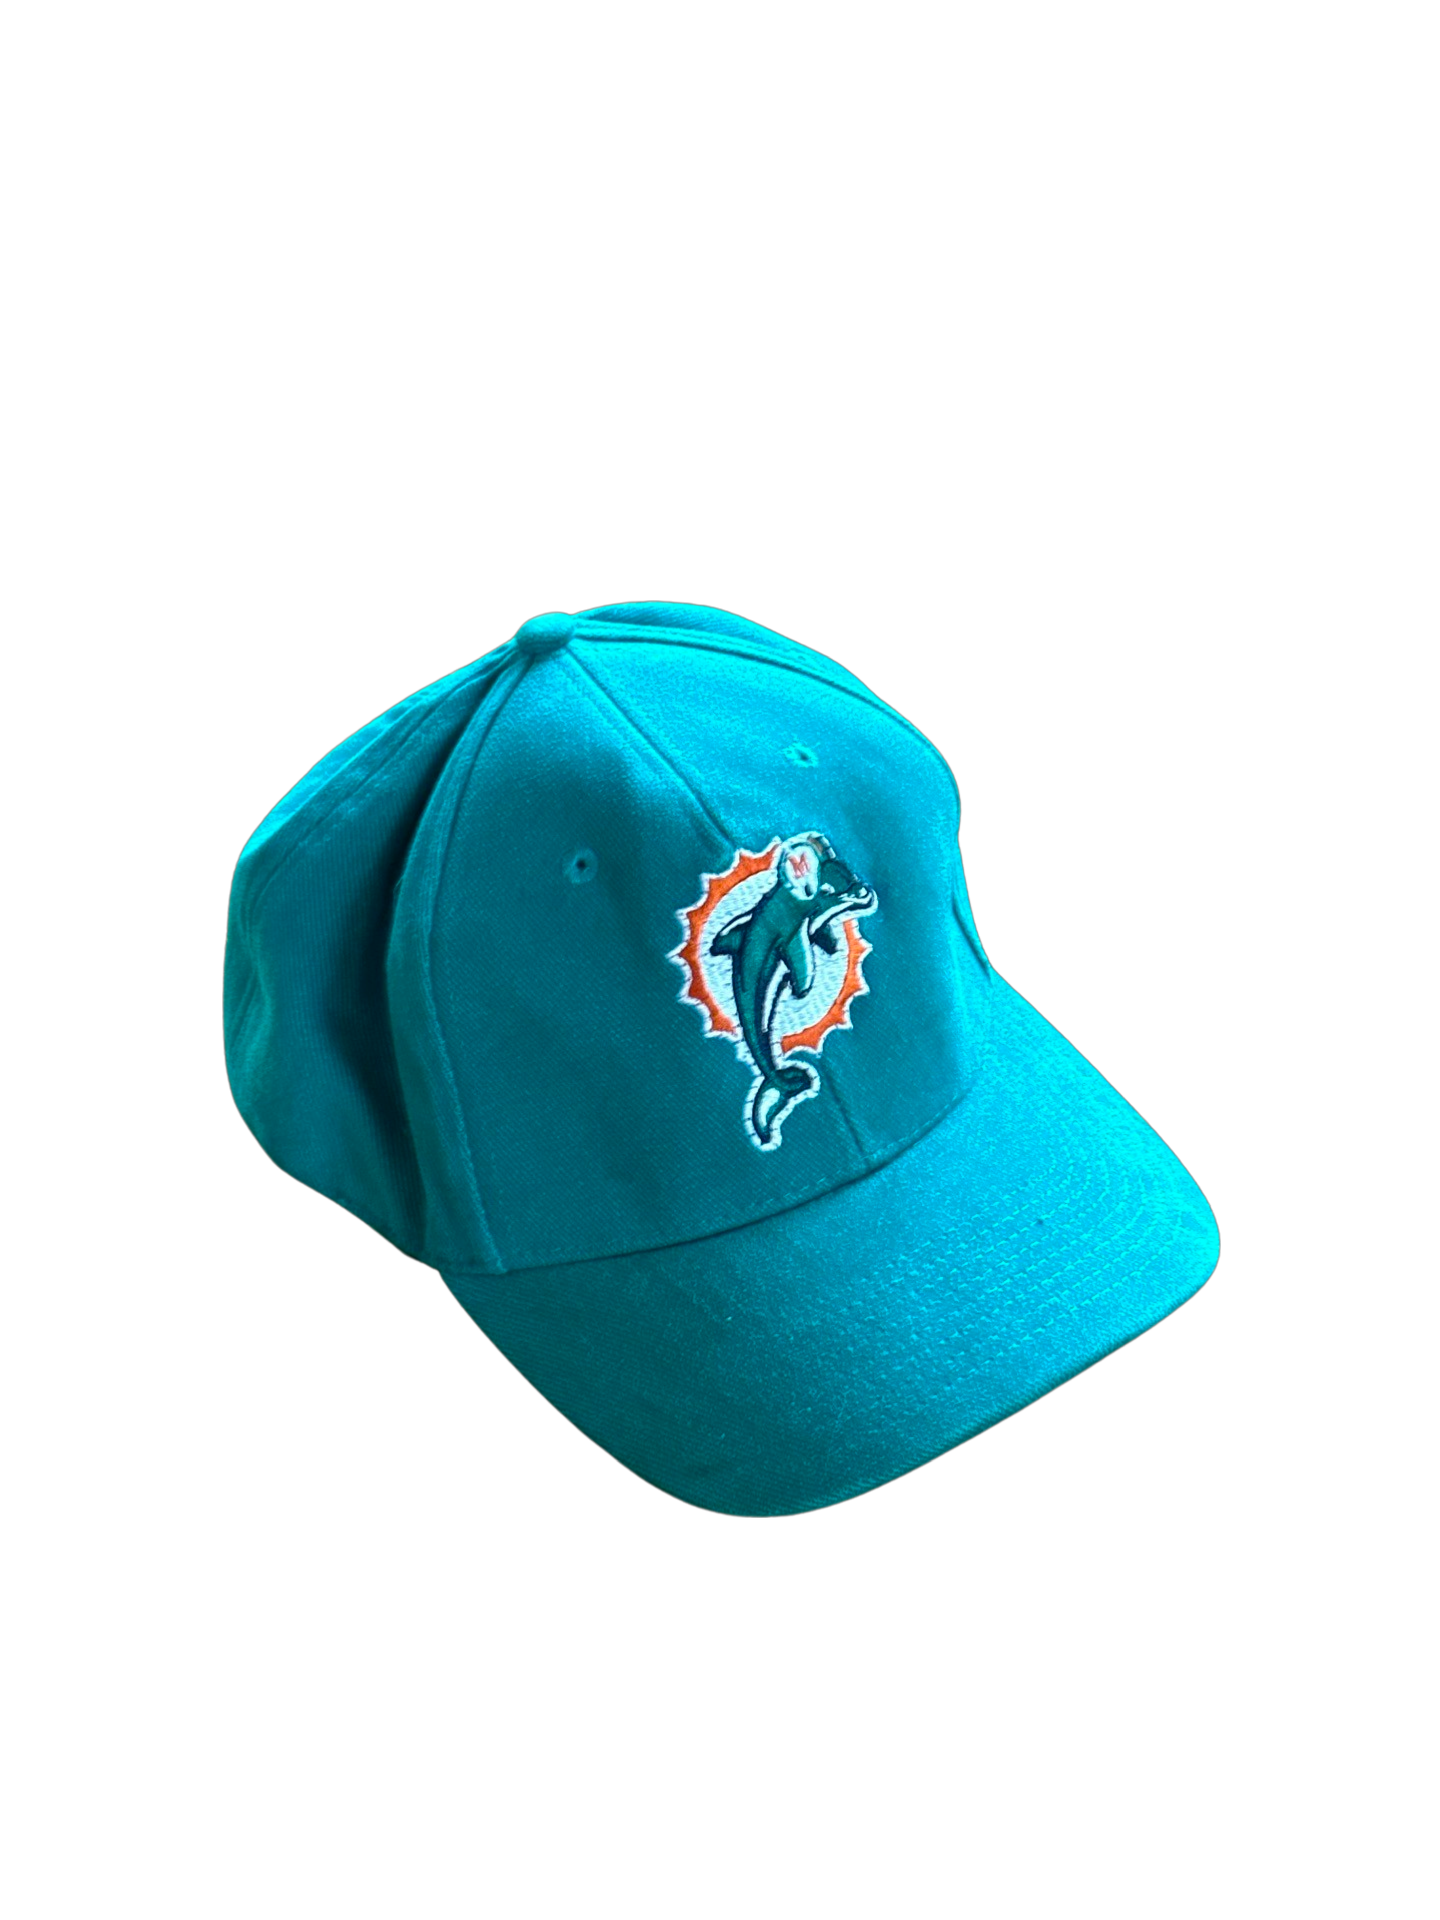 Vintage Miami Dolphins Light up Hat